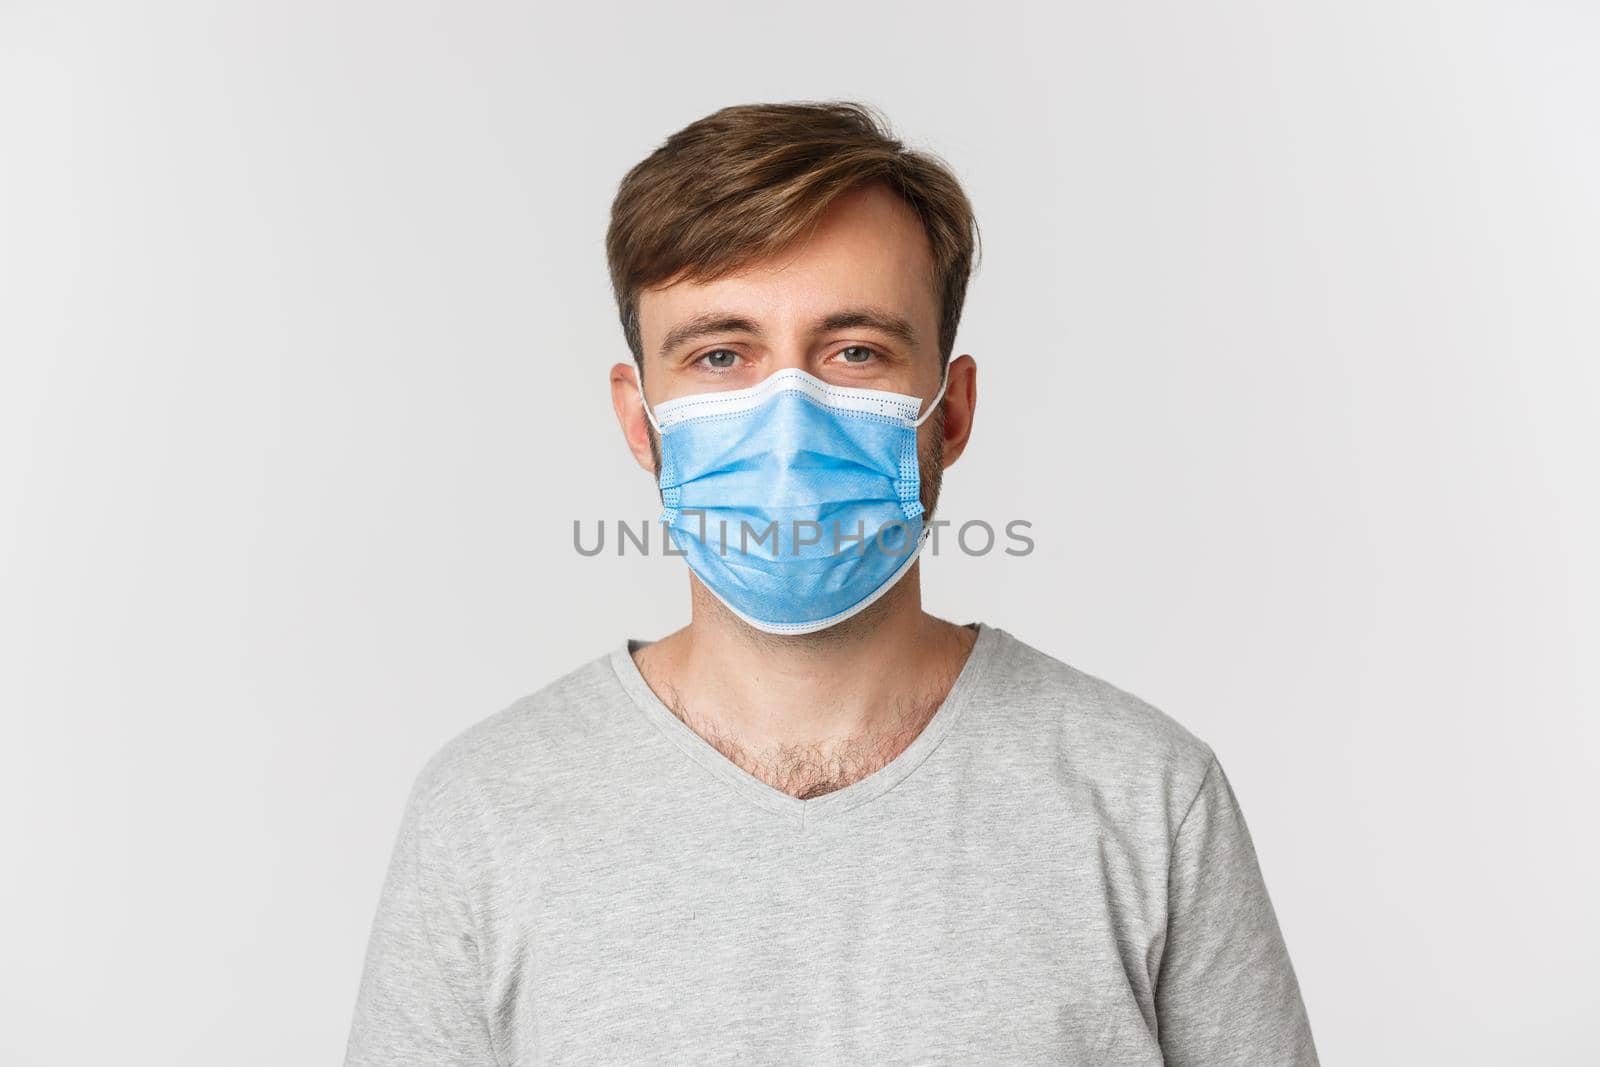 Concept of pandemic, covid-19 and social-distancing. Close-up of caucasian man in medical mask looking at camera, standing over white background.